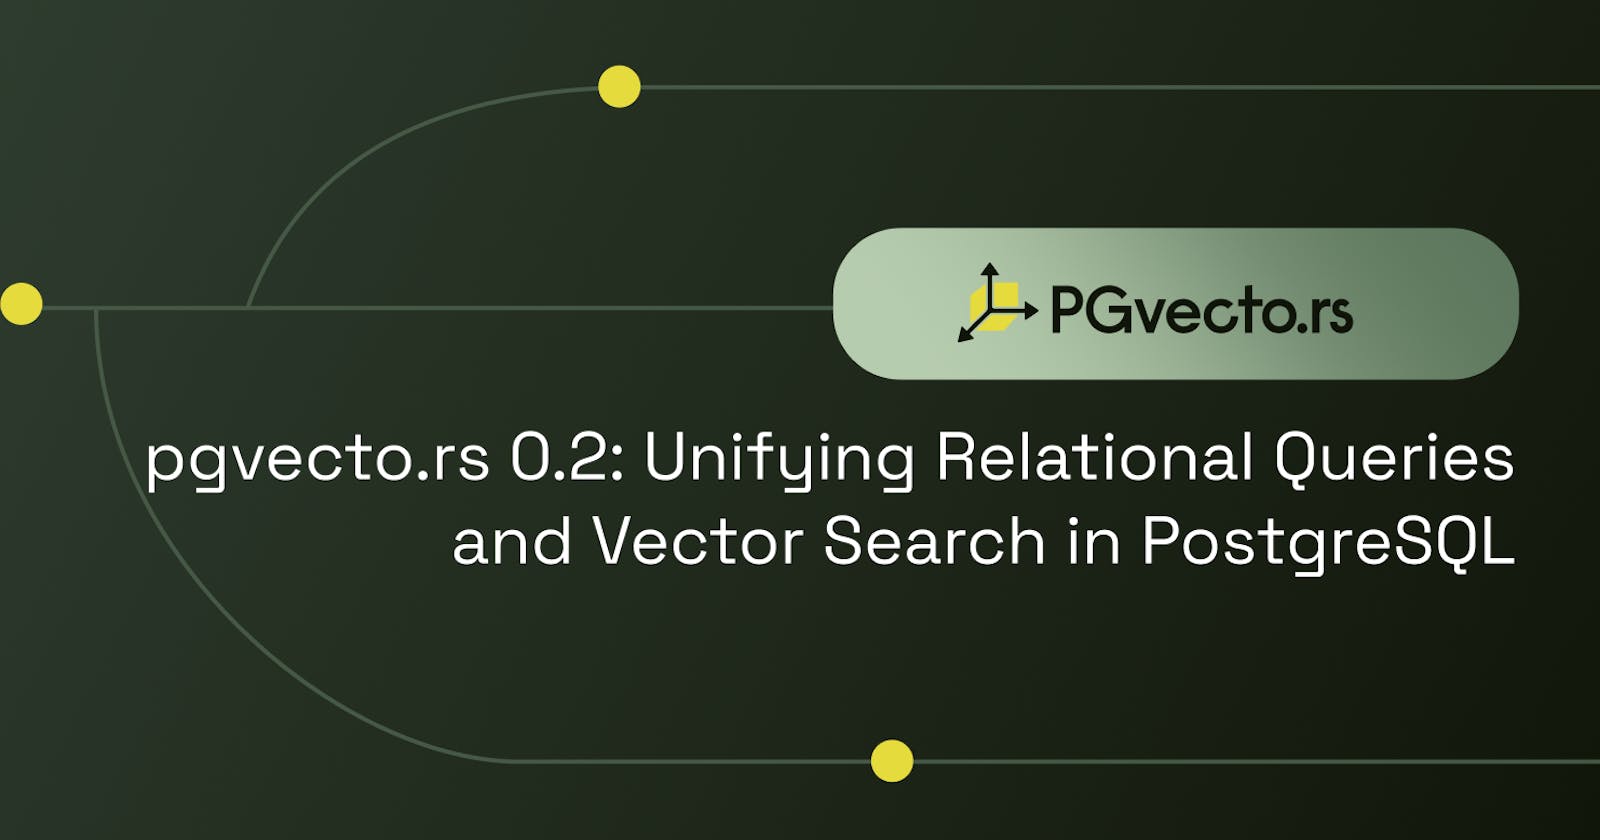 pgvecto.rs 0.2: Unifying Relational Queries and Vector Search in PostgreSQL